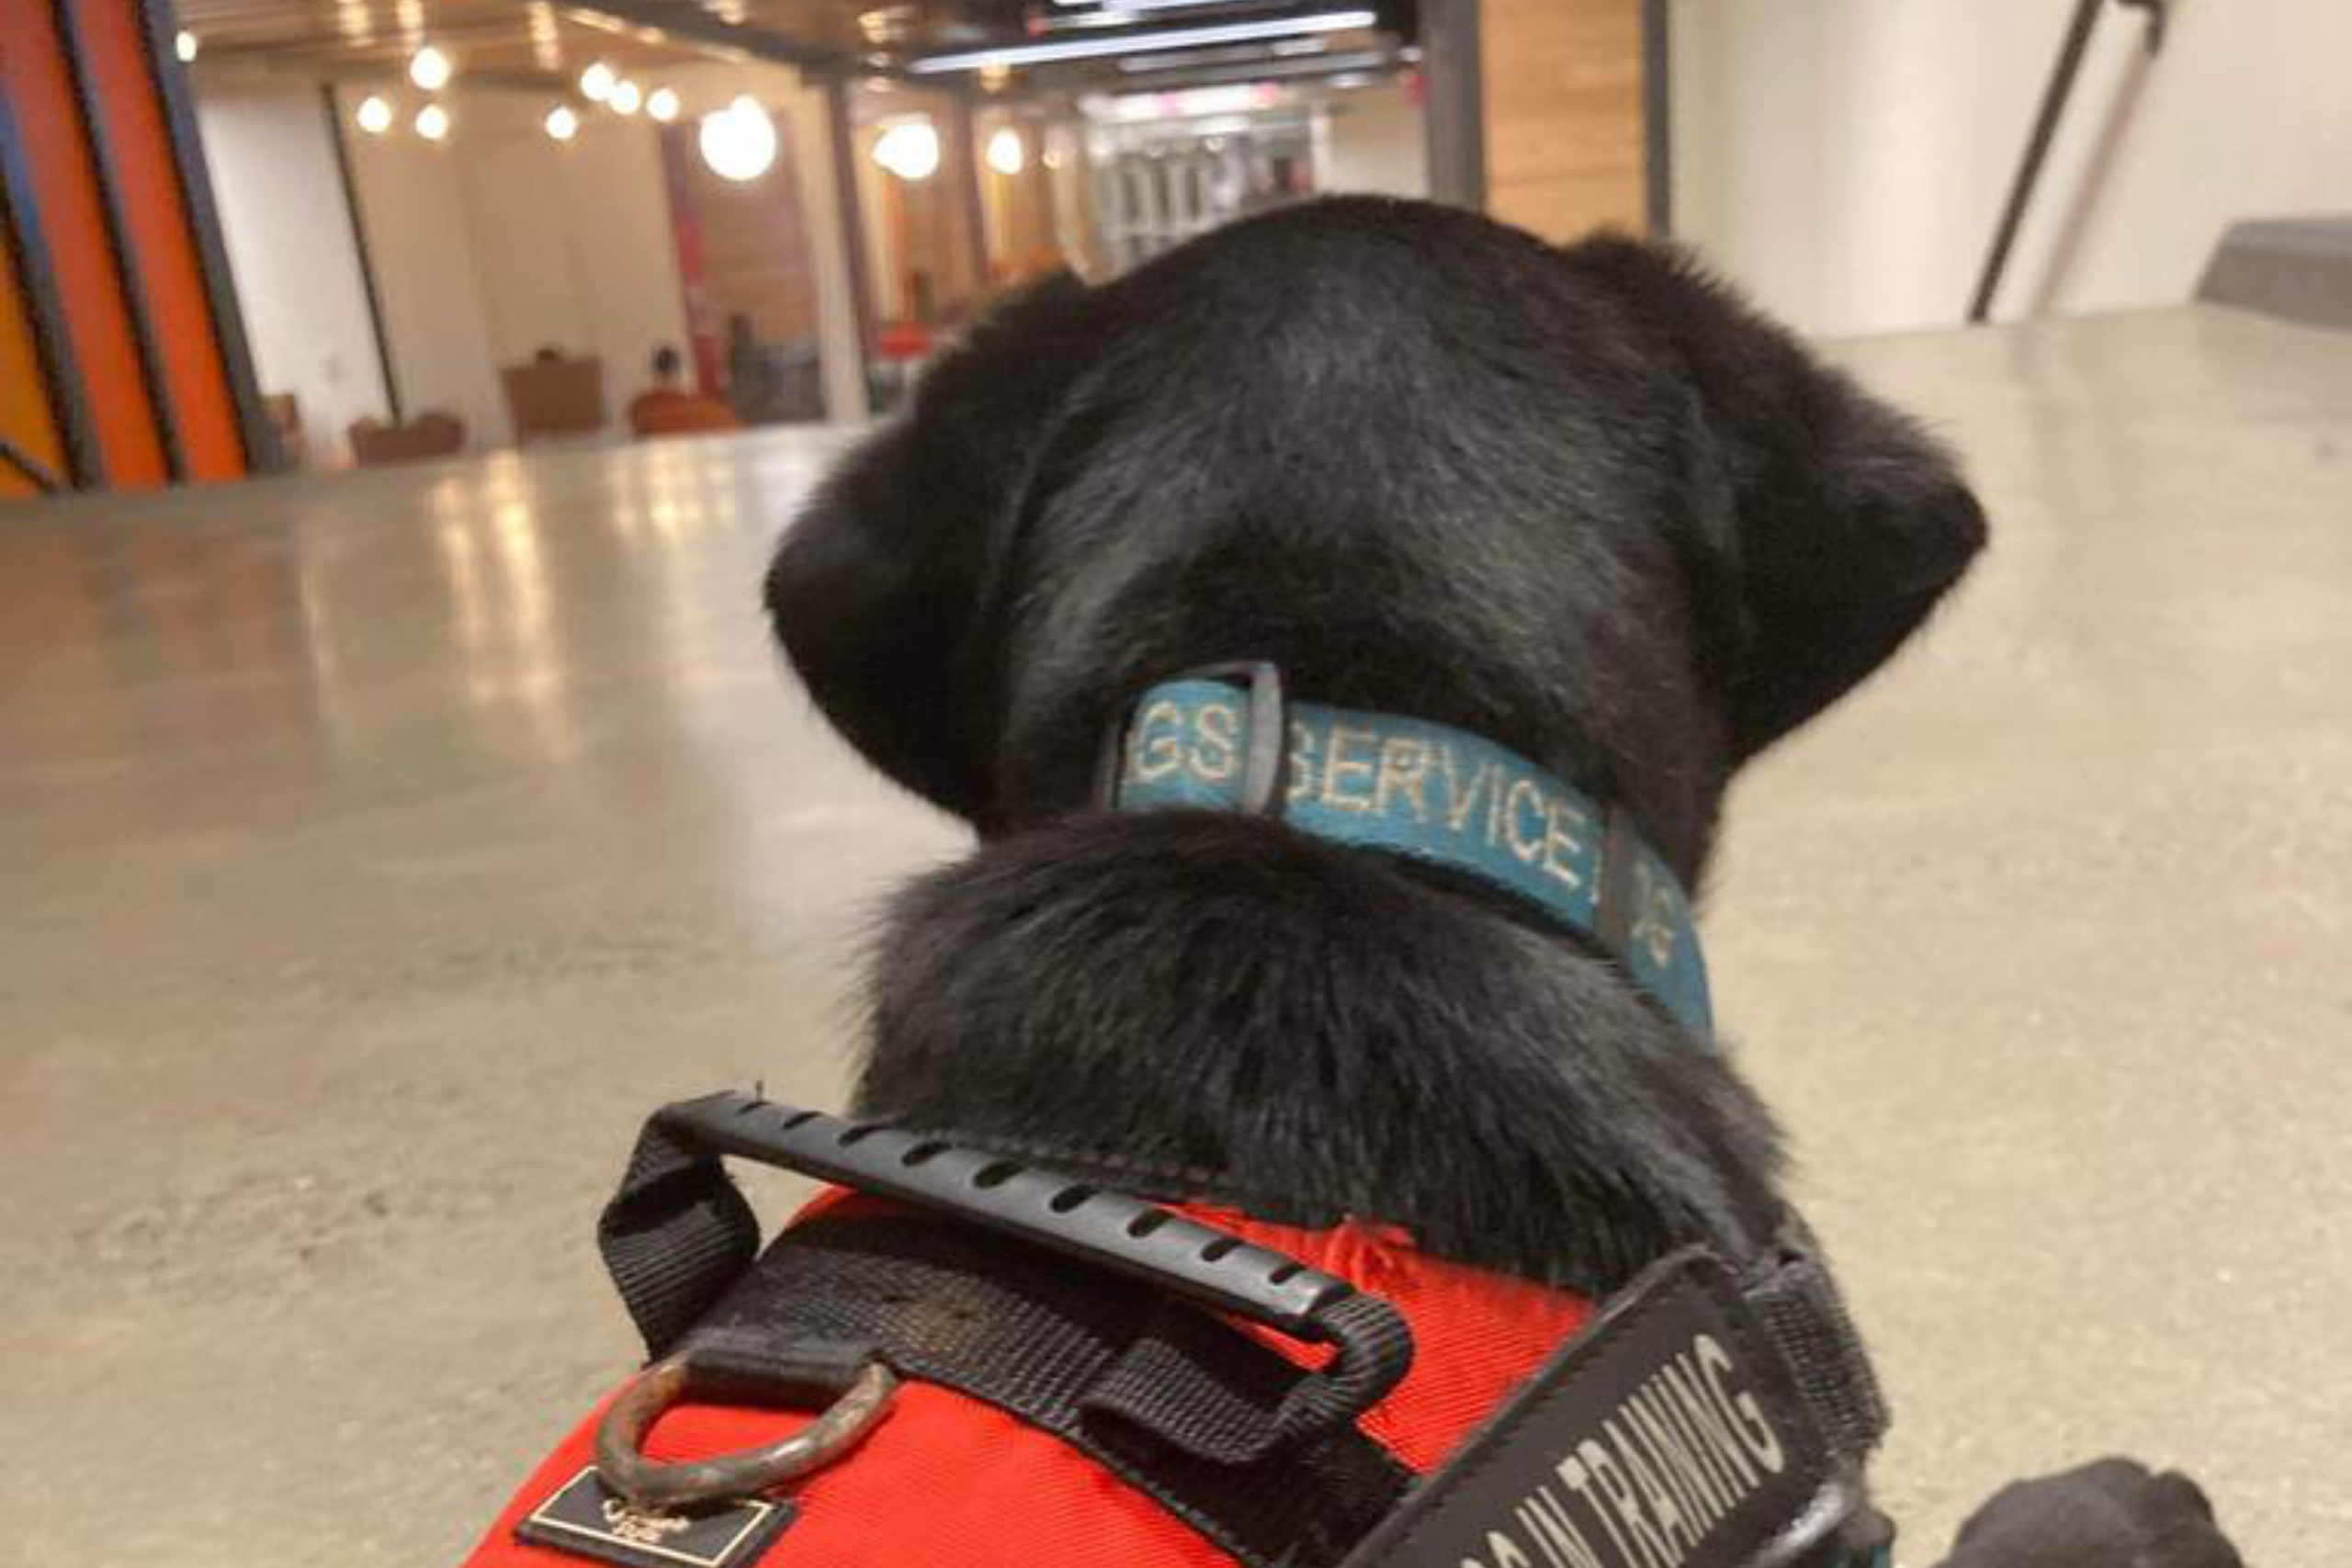 an image of the back of a K1FIA service dog's head. socially responsible business